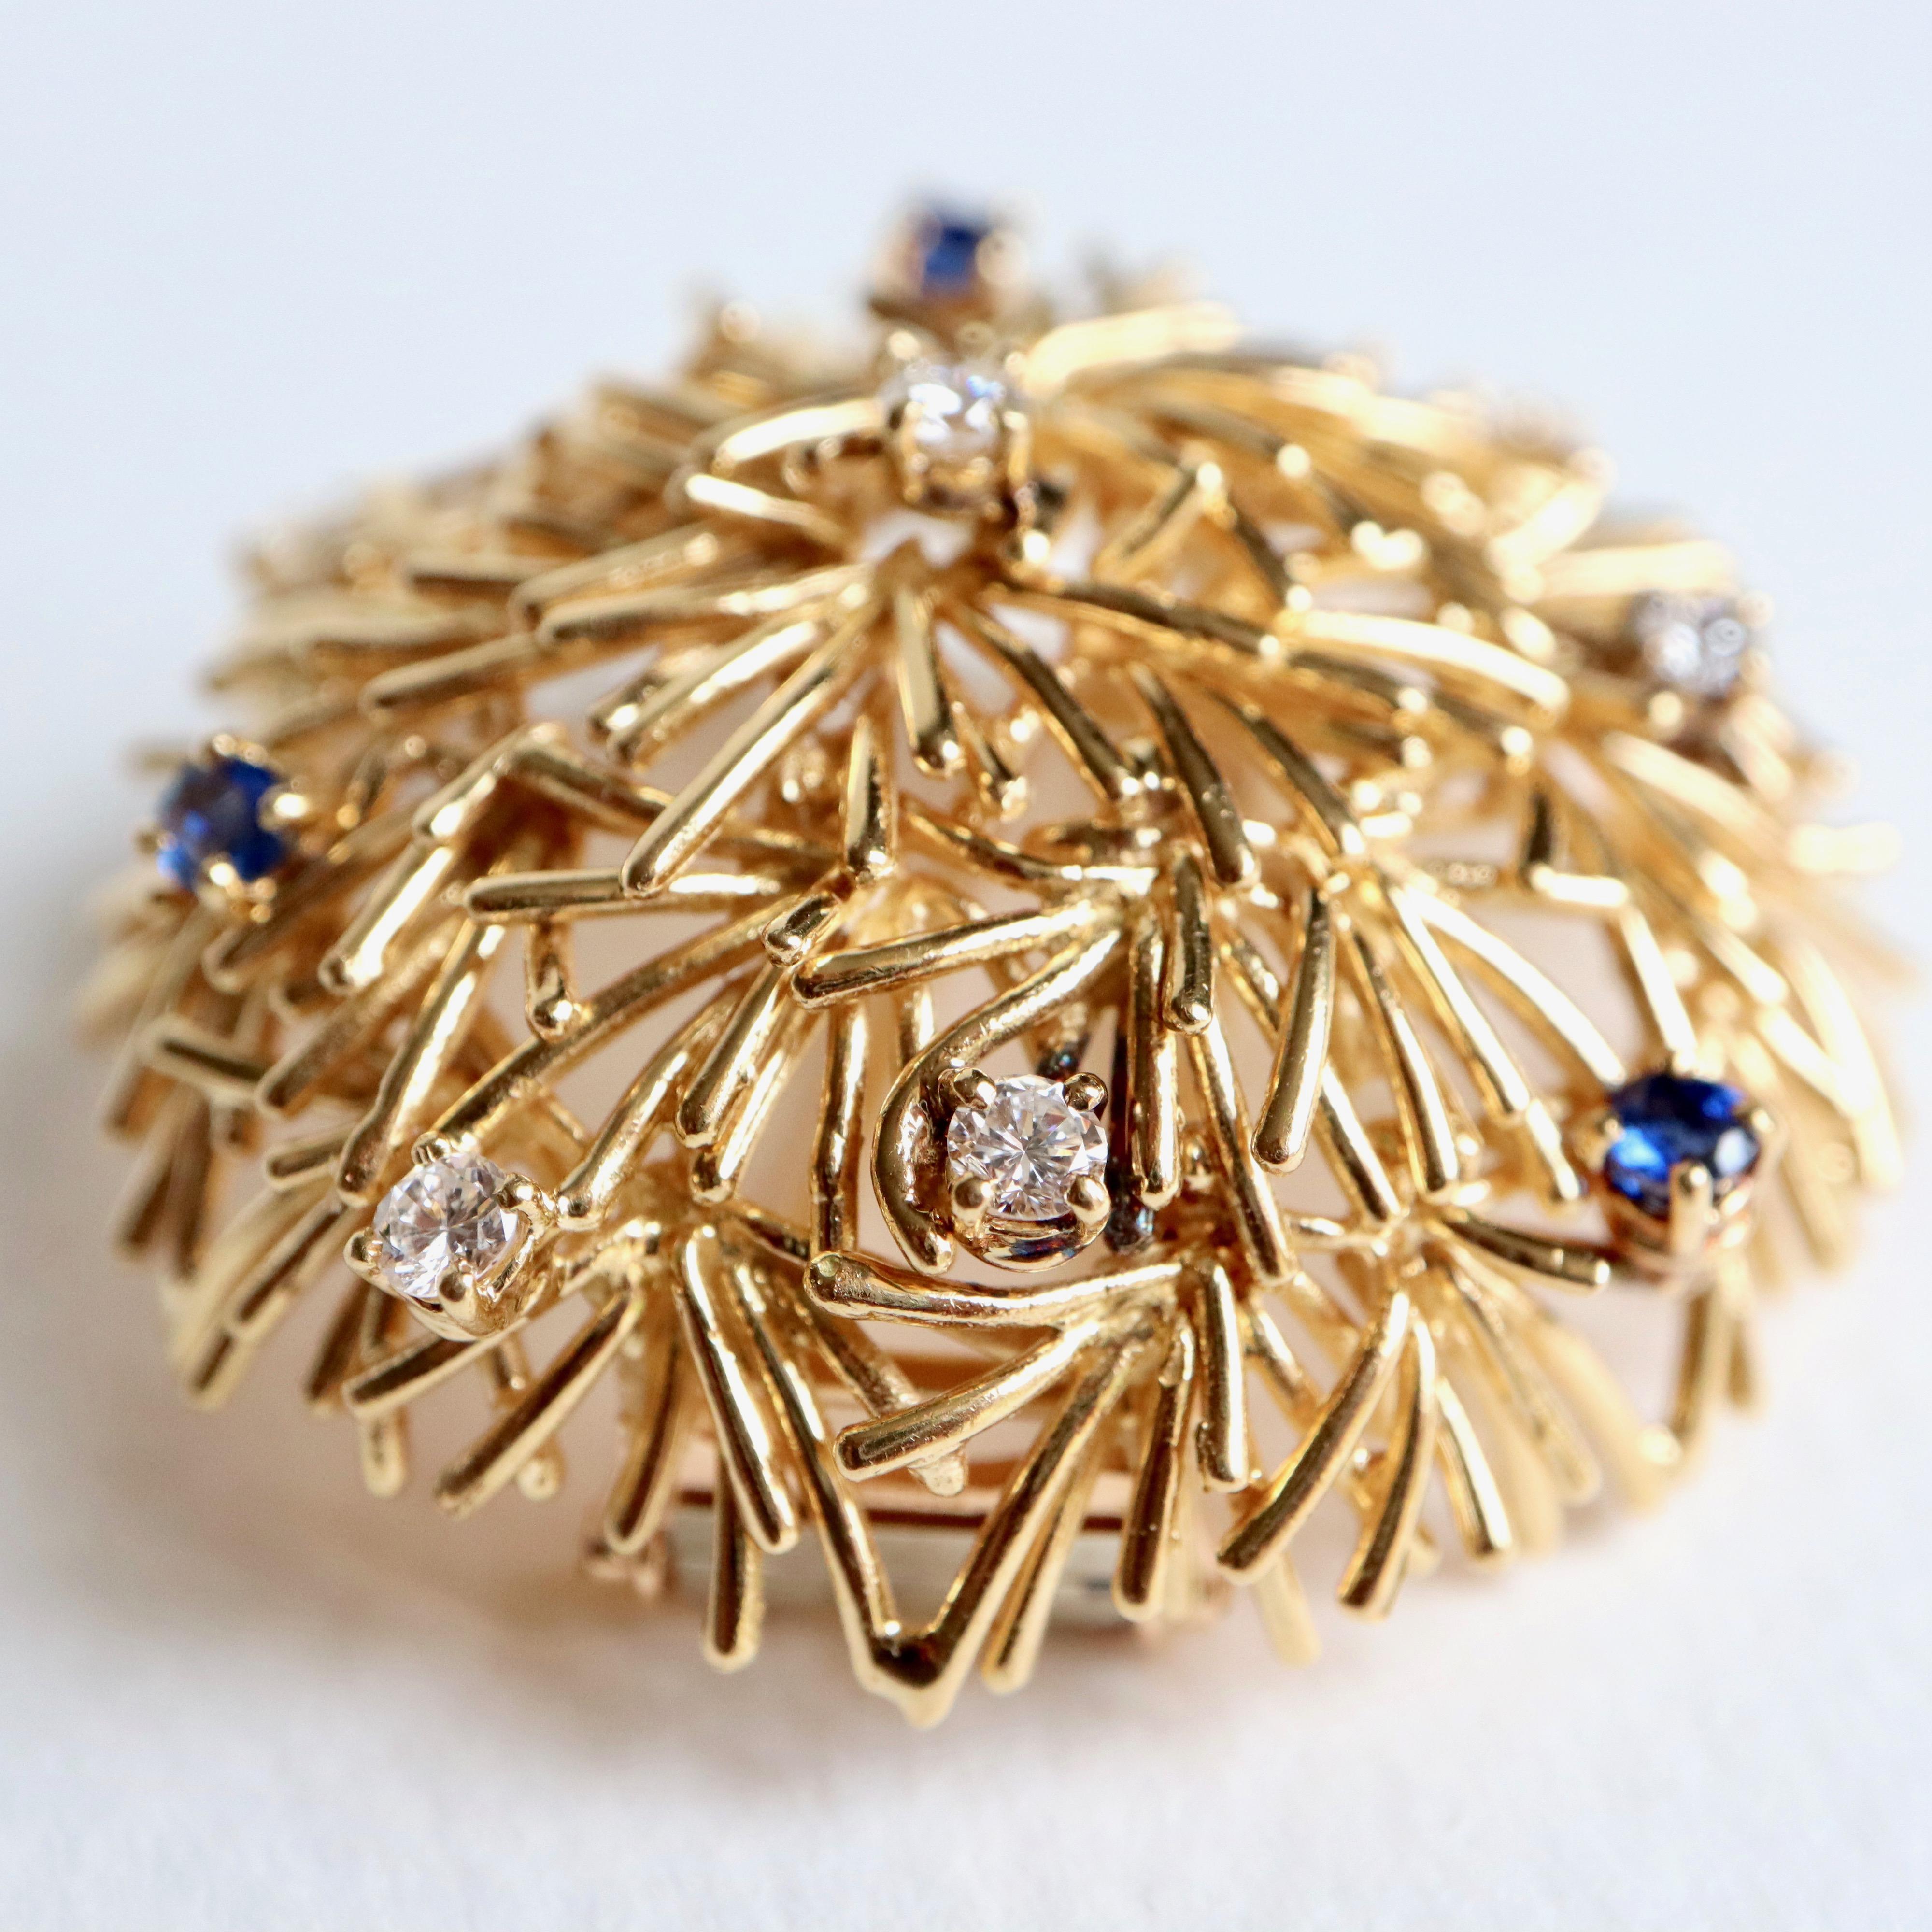 BOUCHERON 18K yellow Gold stylized Thorn Ball Brooch with Sapphires and Diamonds
3 Sapphires and 6 Brilliant Cut Diamonds
Signed Boucheron Paris
Diameter of the brooch: 4 cm
Gross weight: 23.7 g